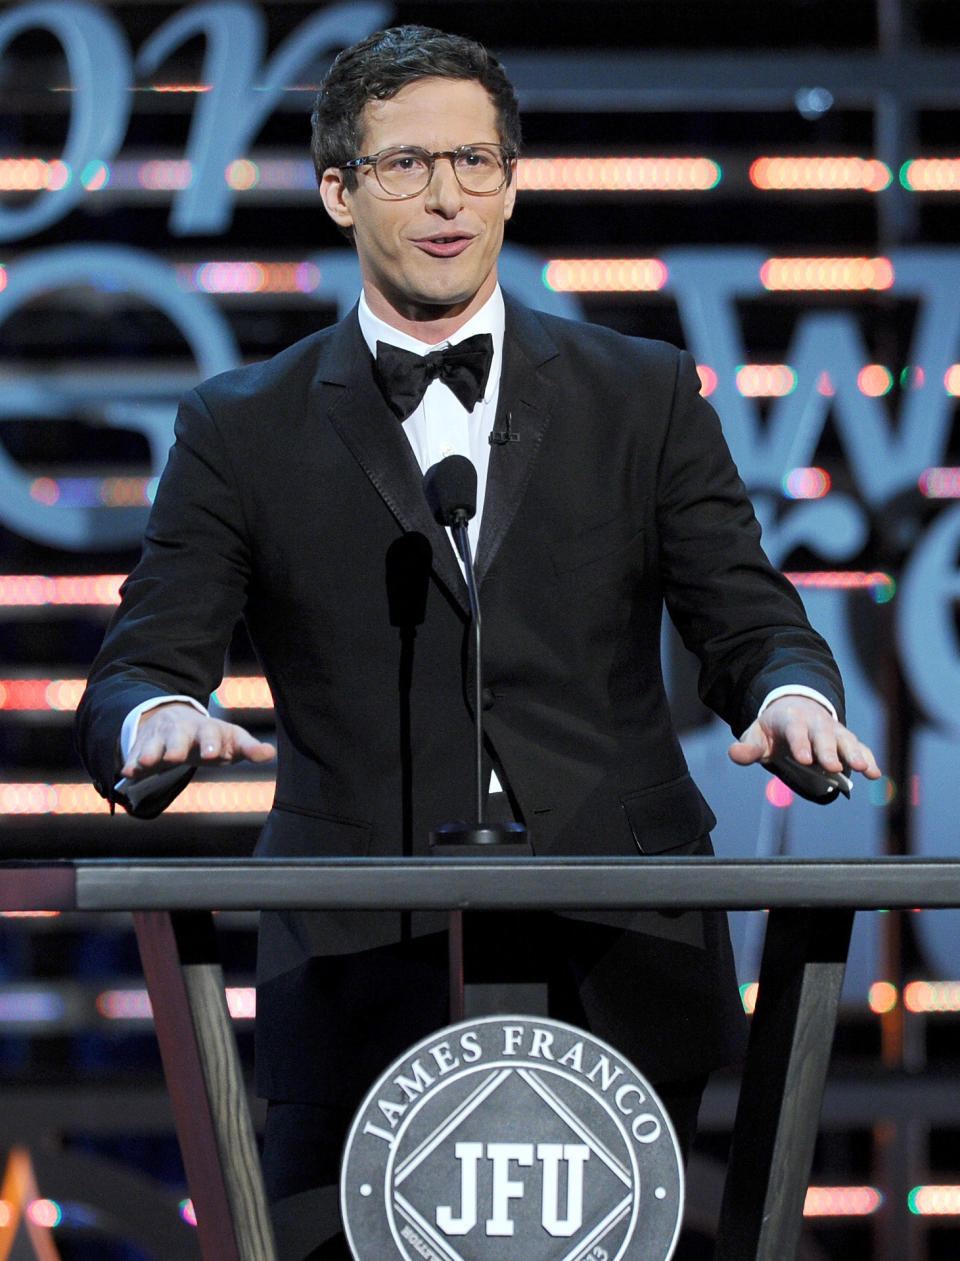 CULVER CITY, CA - AUGUST 25:  Actor Andy Samberg speaks onstage during The Comedy Central Roast of James Franco at Culver Studios on August 25, 2013 in Culver City, California. The Comedy Central Roast Of James Franco will air on September 2 at 10:00 p.m. ET/PT.  (Photo by Kevin Winter/Getty Images for Comedy Central)